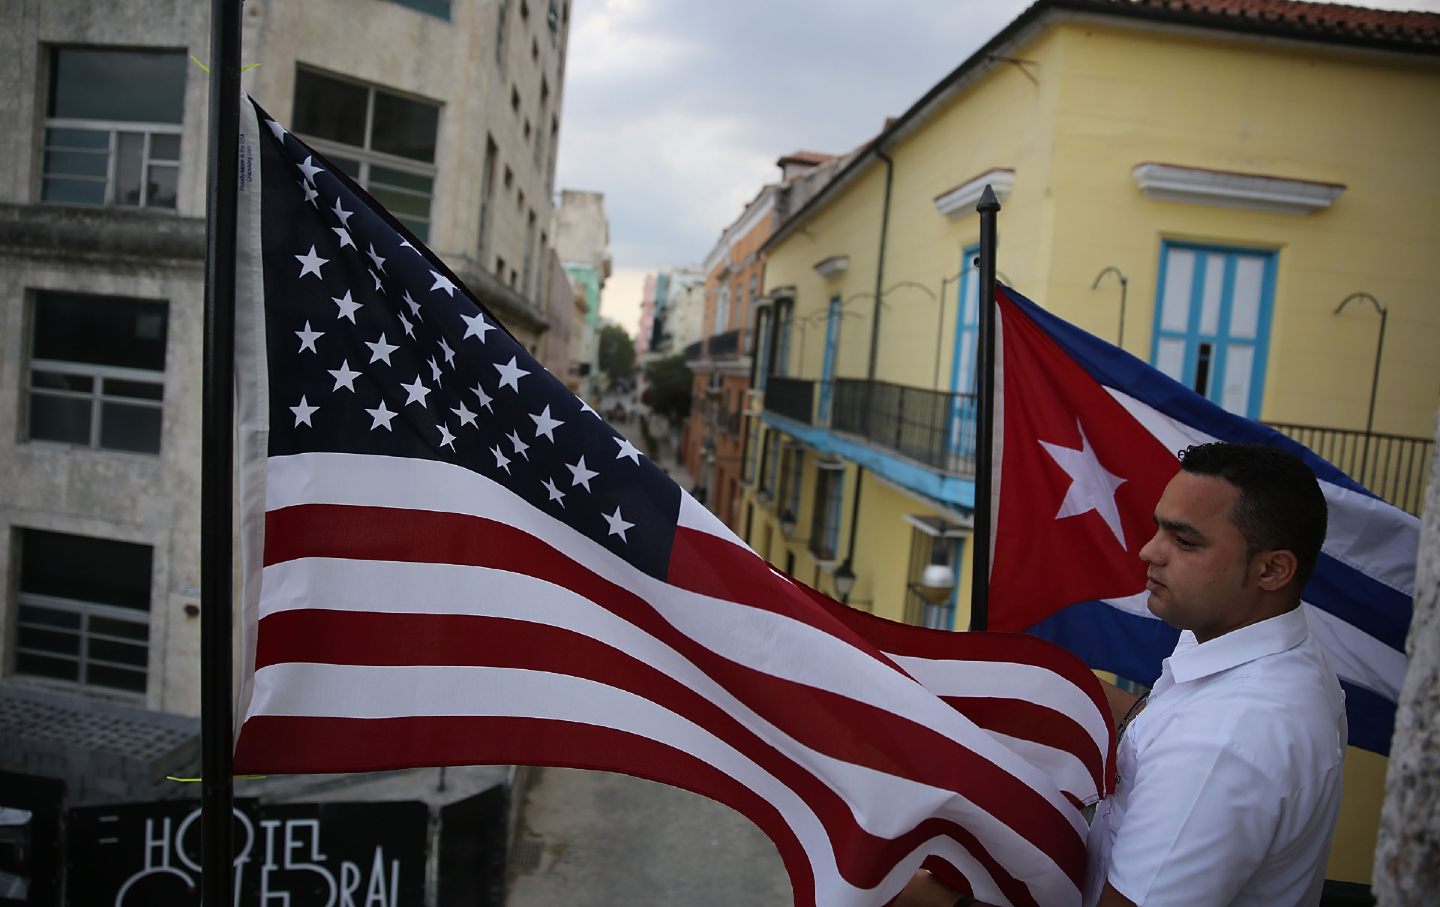 Jose Alfredo stands between an American flag and a Cuban flag